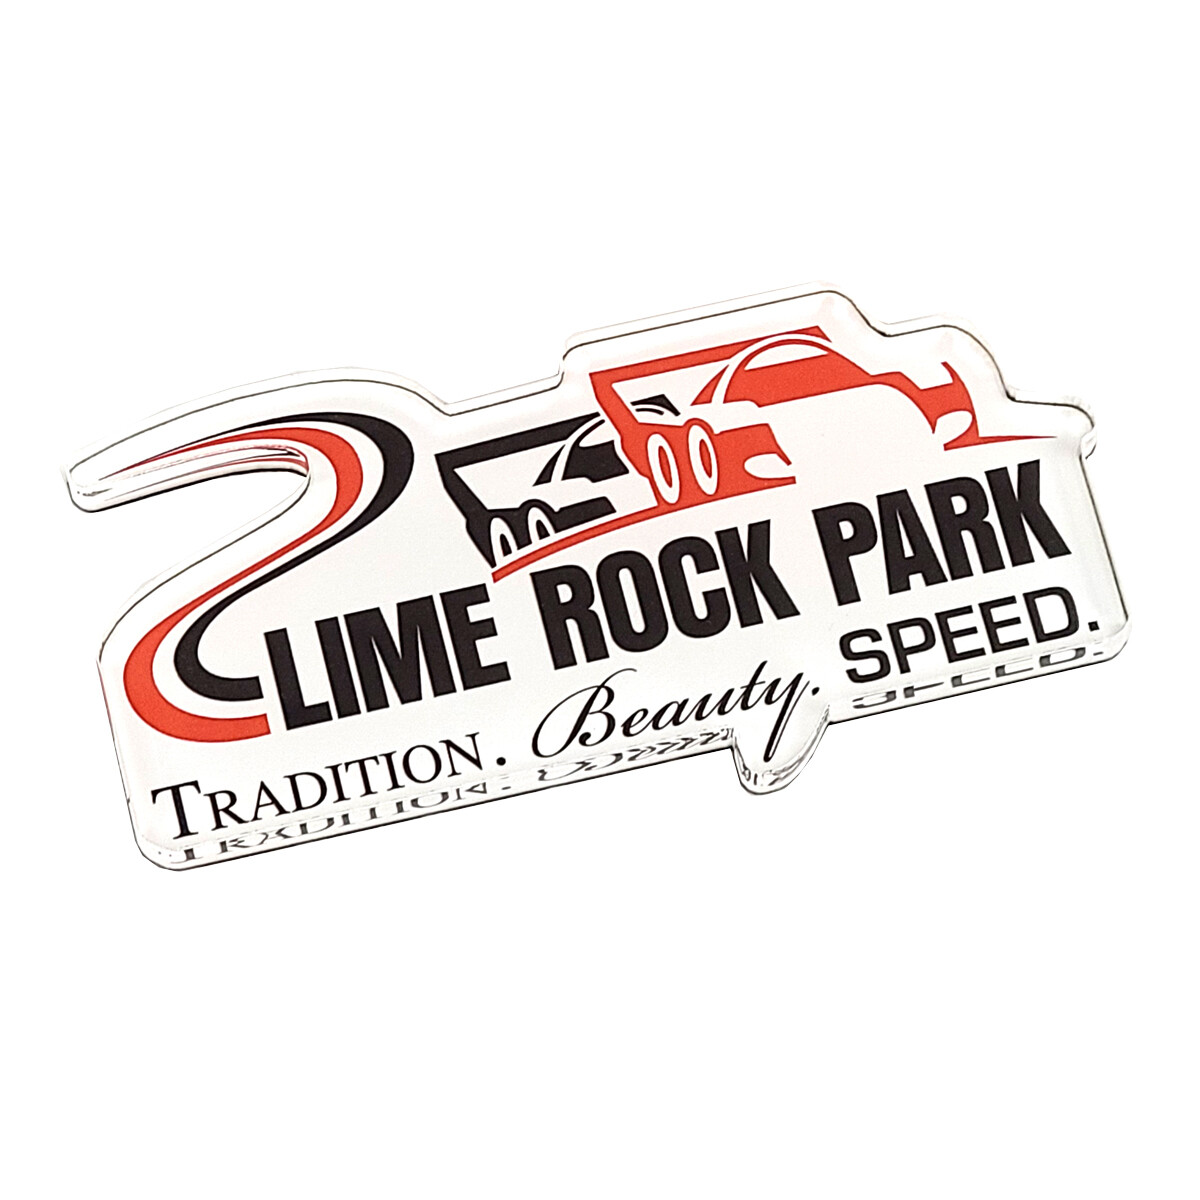 Lime Rock Magnet - 1/4" Thick Acrylic